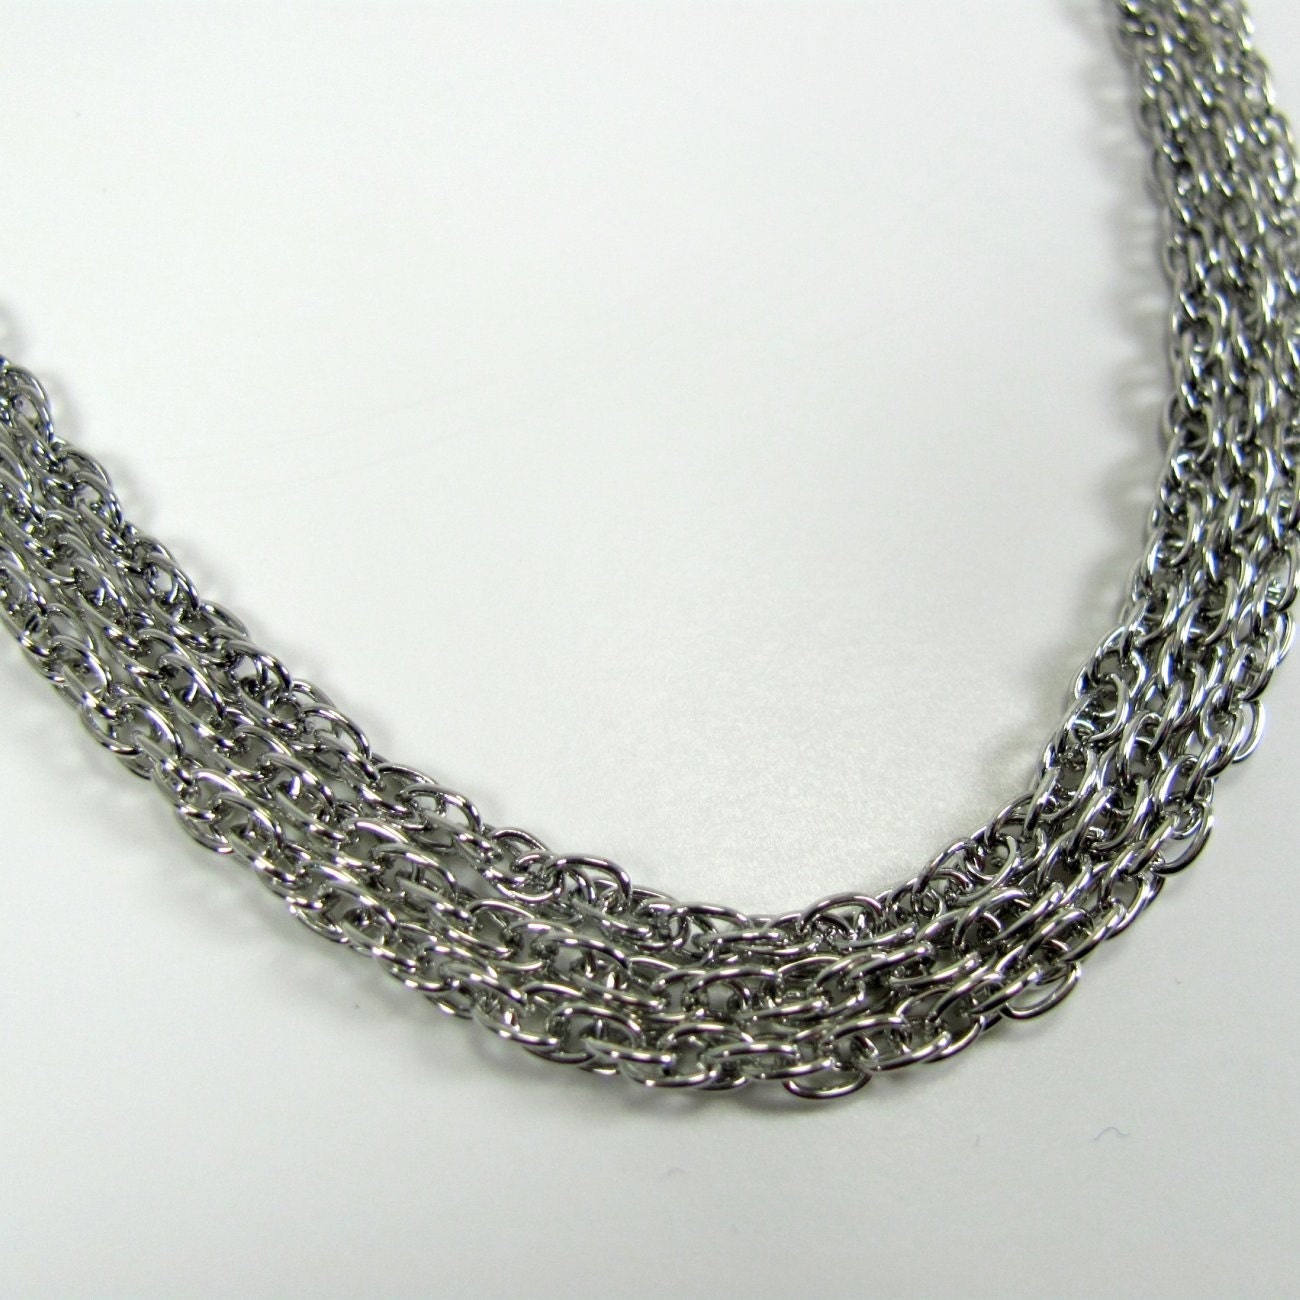 Silver Plated Rope Style 18 inch Necklaces - 3